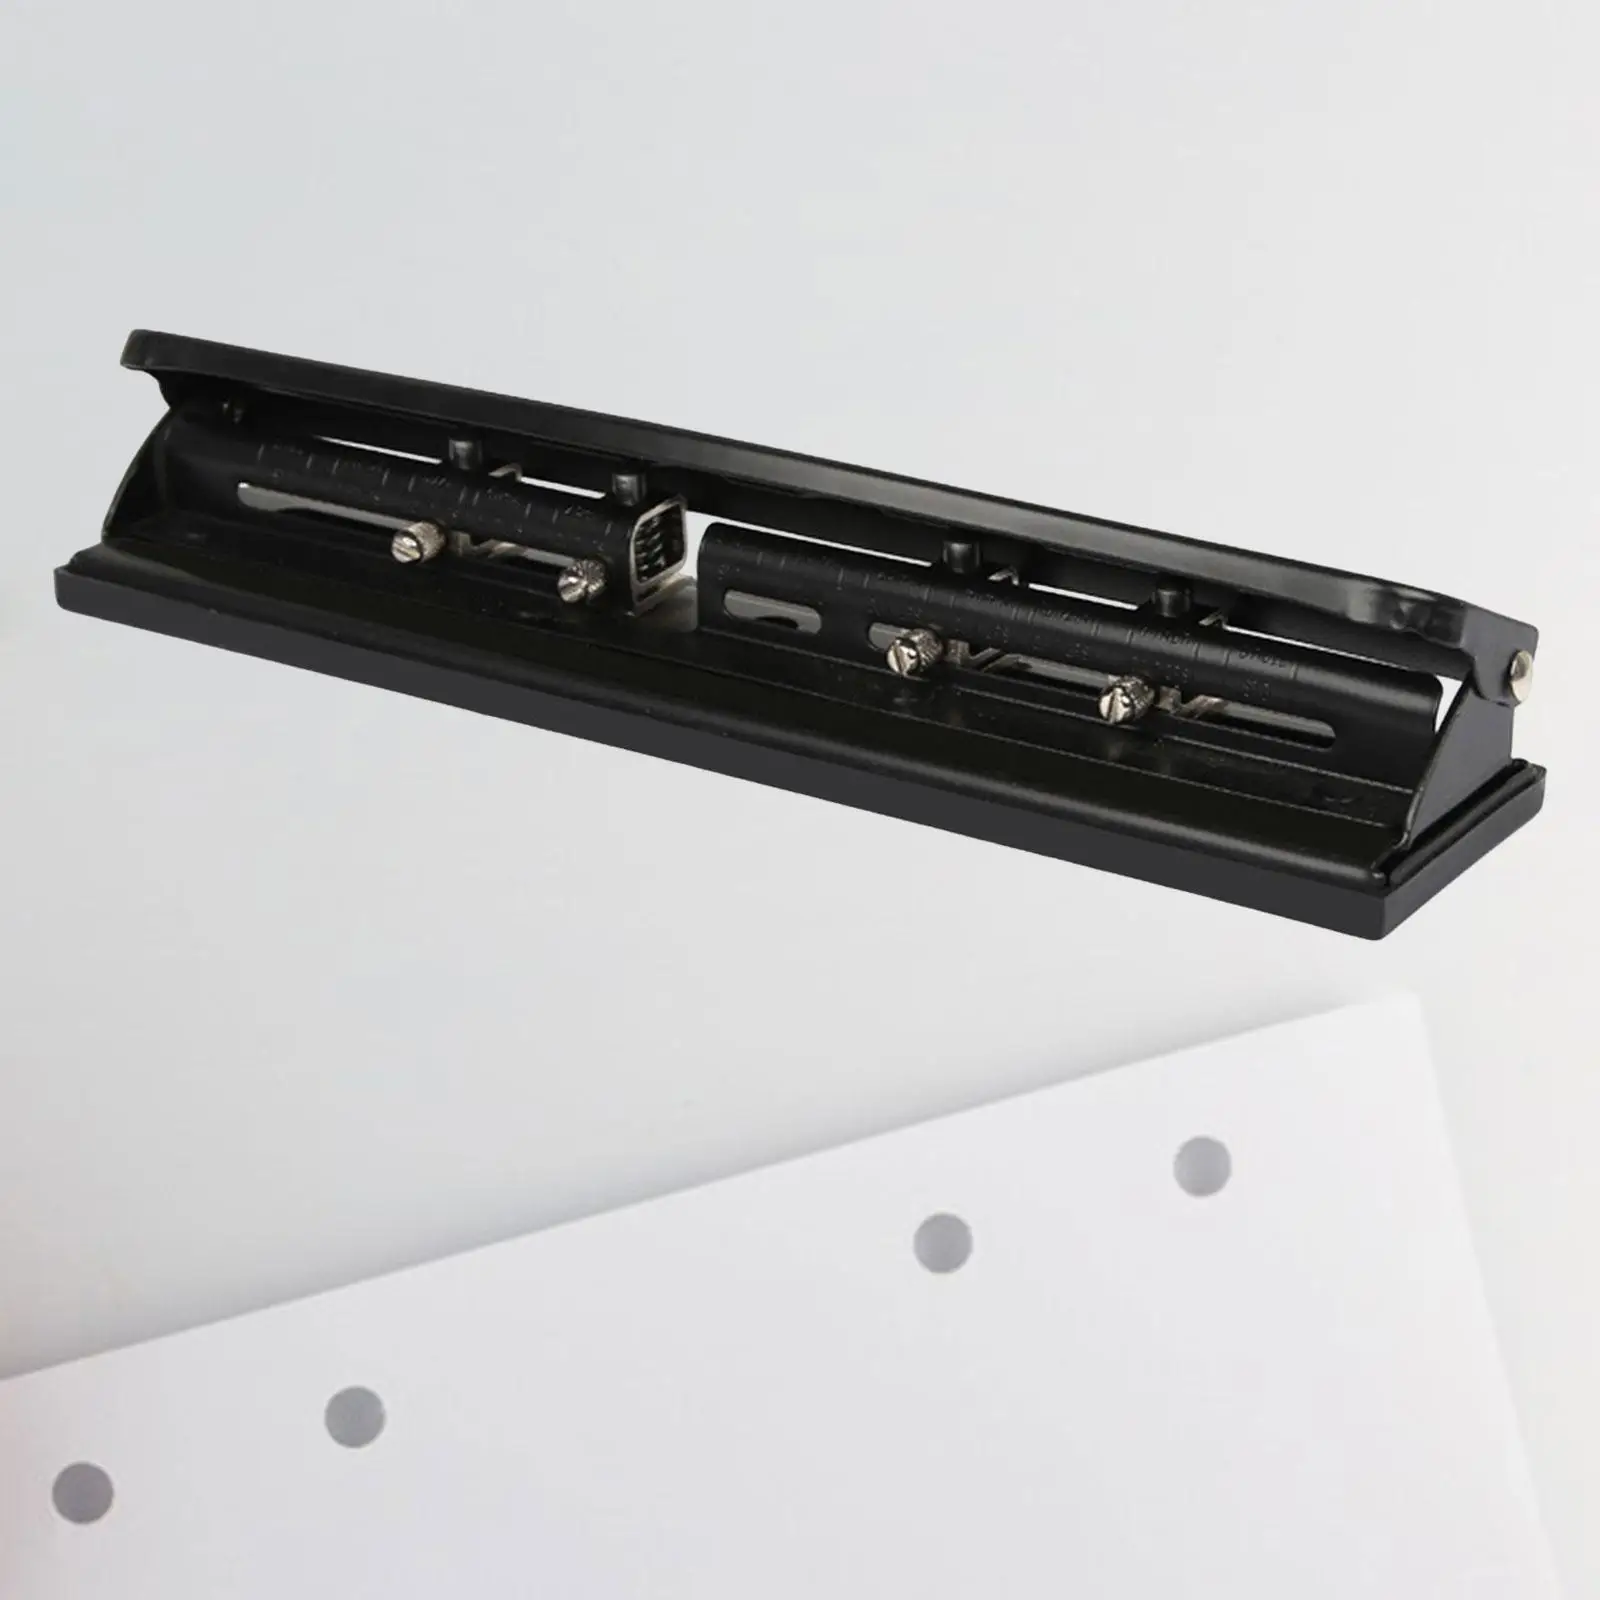 4 Hole Punch File Binding Precision Manual Desktop Heavy Duty Adjustable Paper Puncher for School Classroom Craft Office Working